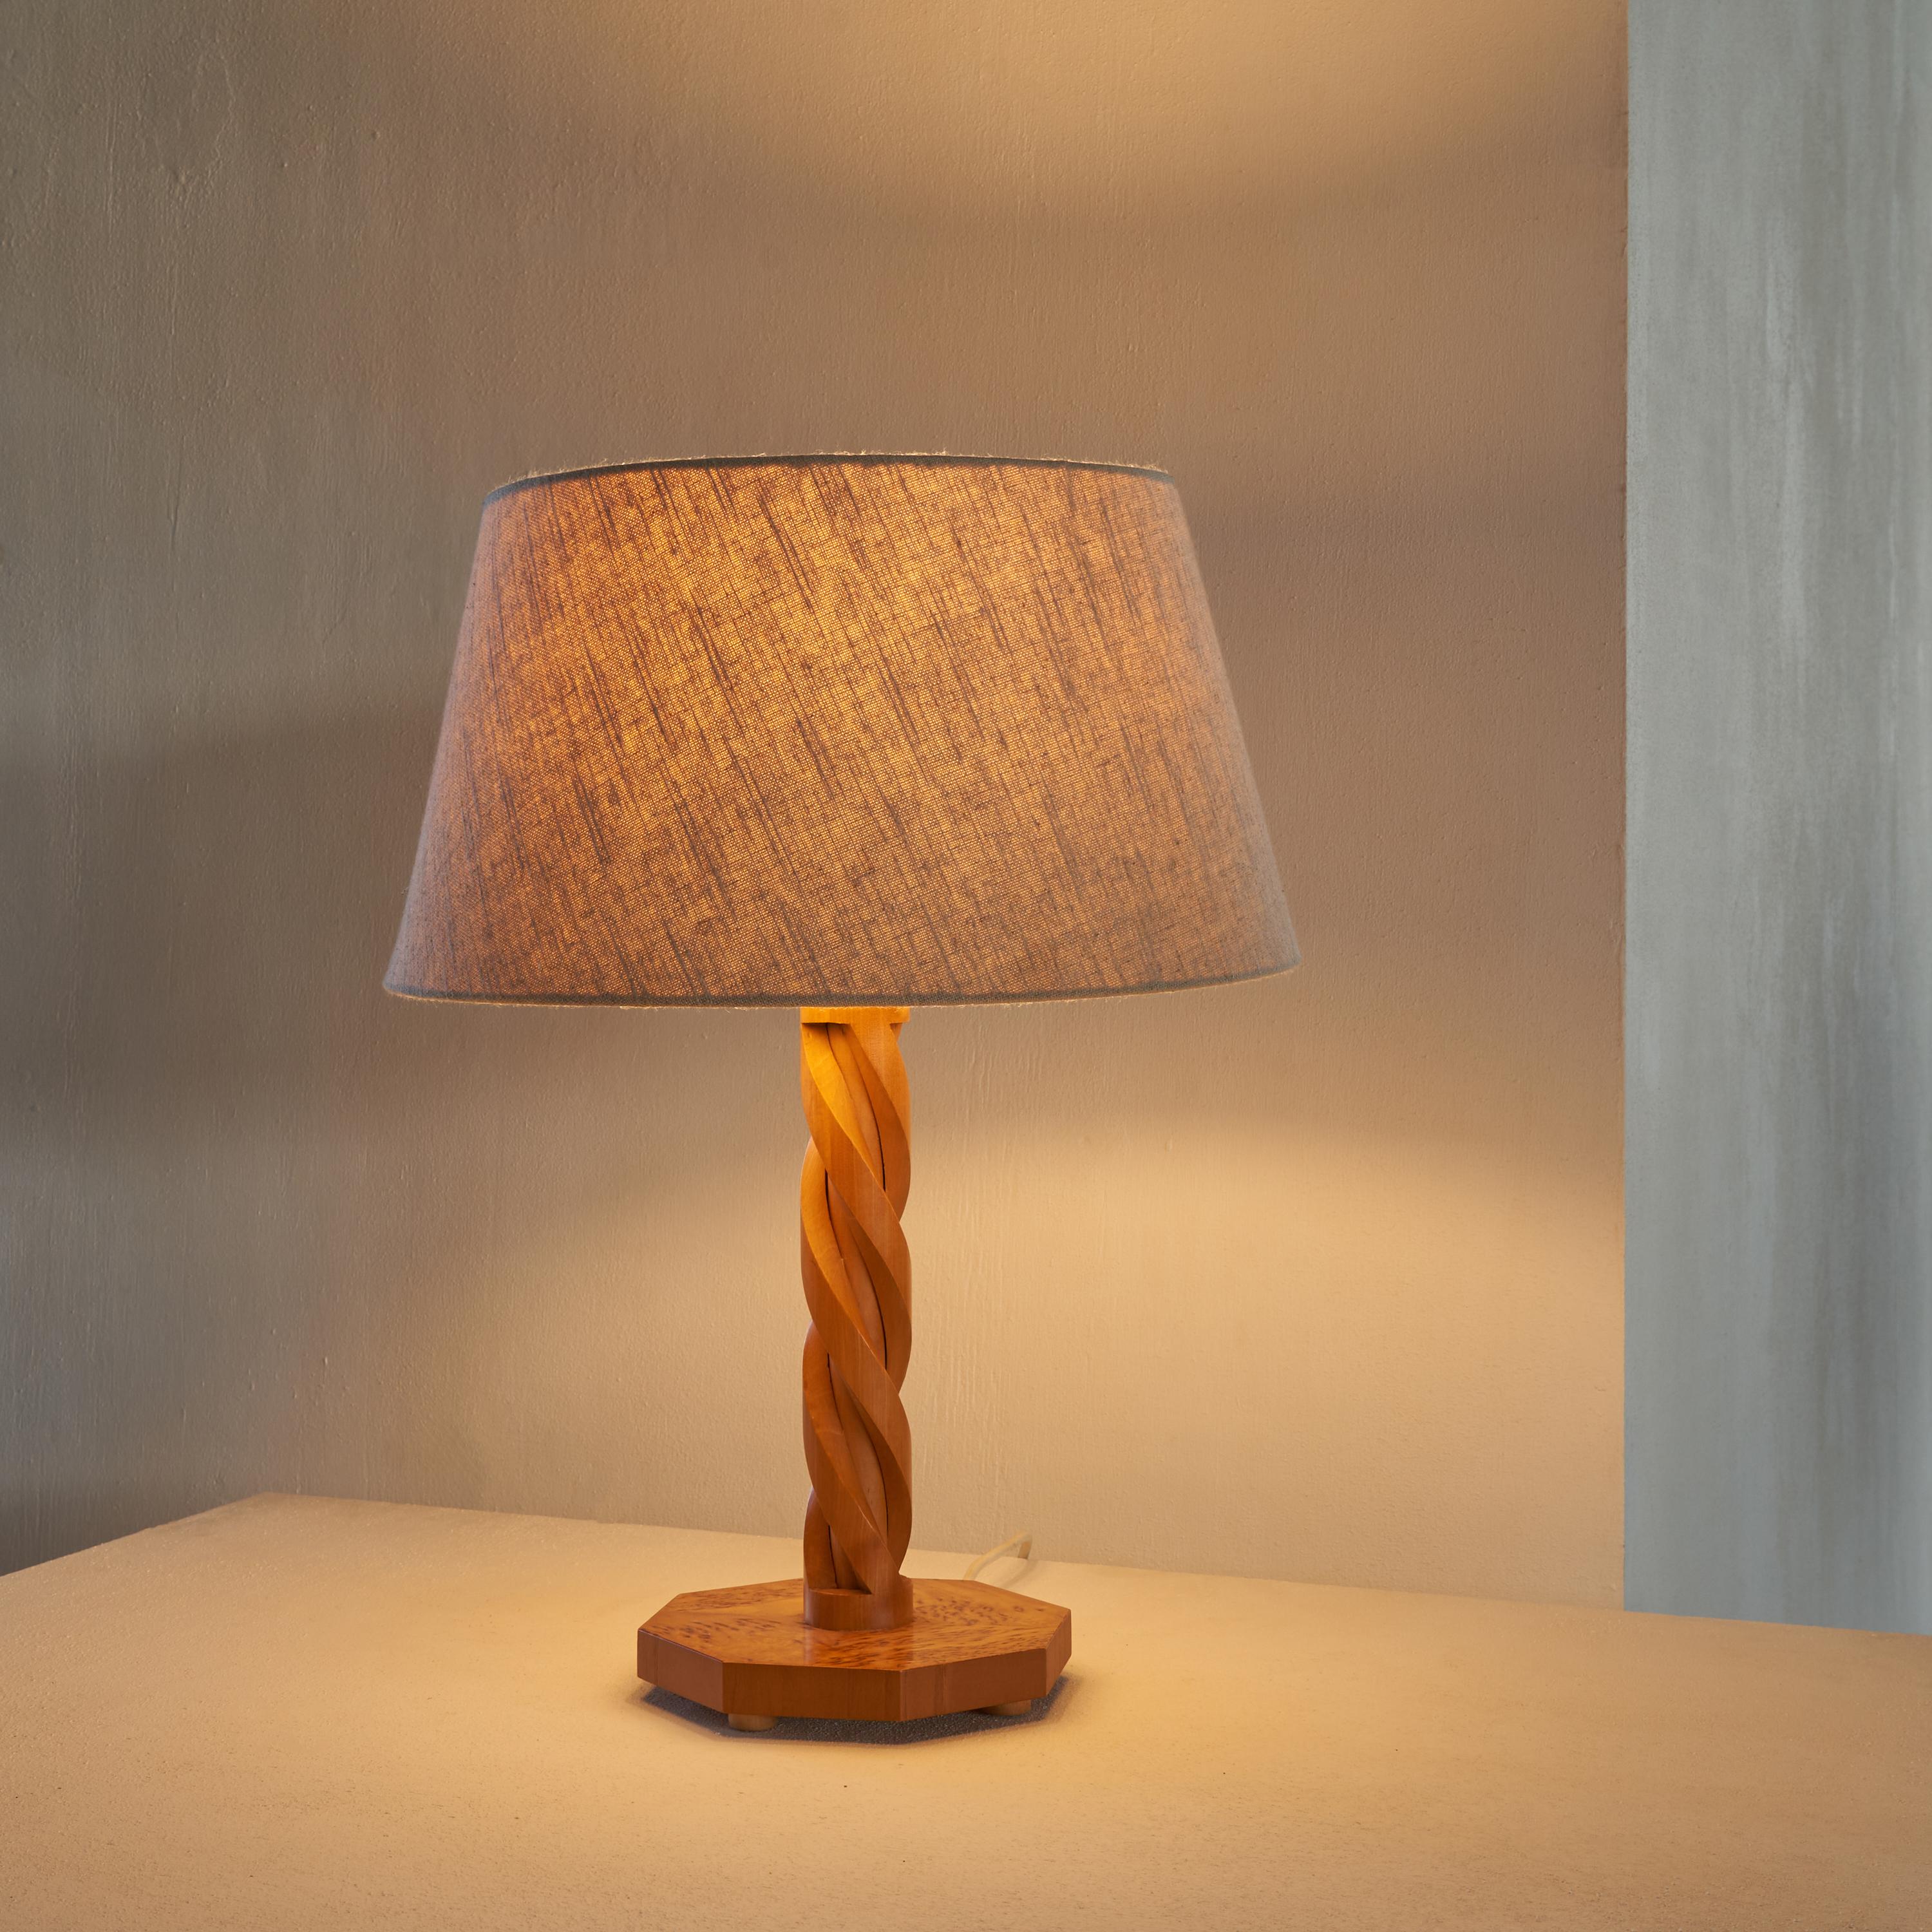 Table Lamp in Hand Carved Wood and Burl Veneer. Europe, 1988.

This is a unique table lamp with a turned hand carved wooden stem and a base made out of wood and beautiful burl veneer. Almost certainly this is a one-off piece made by a craftsman. A